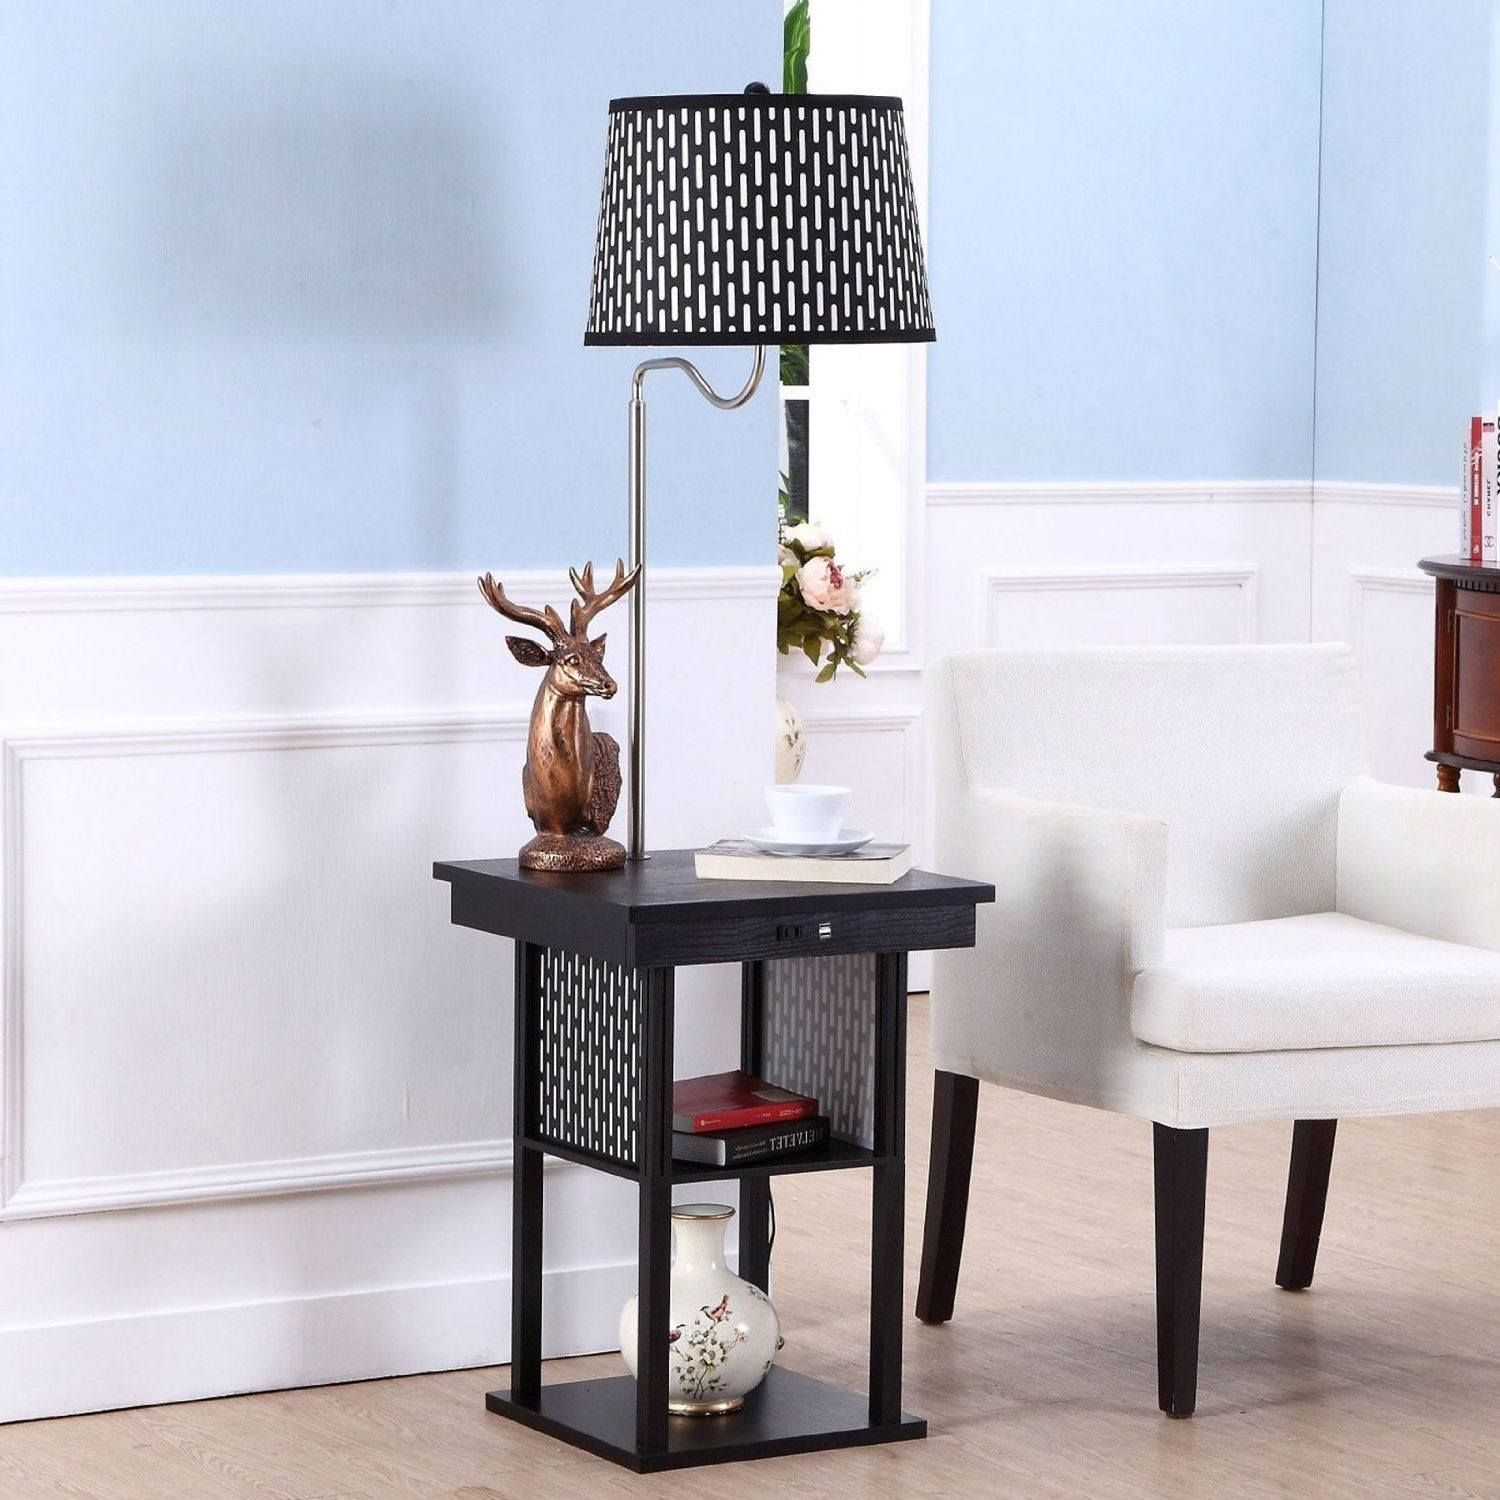 2 In1 Floor Lamp Side Table With Patterned Shade And Usb throughout proportions 1500 X 1500